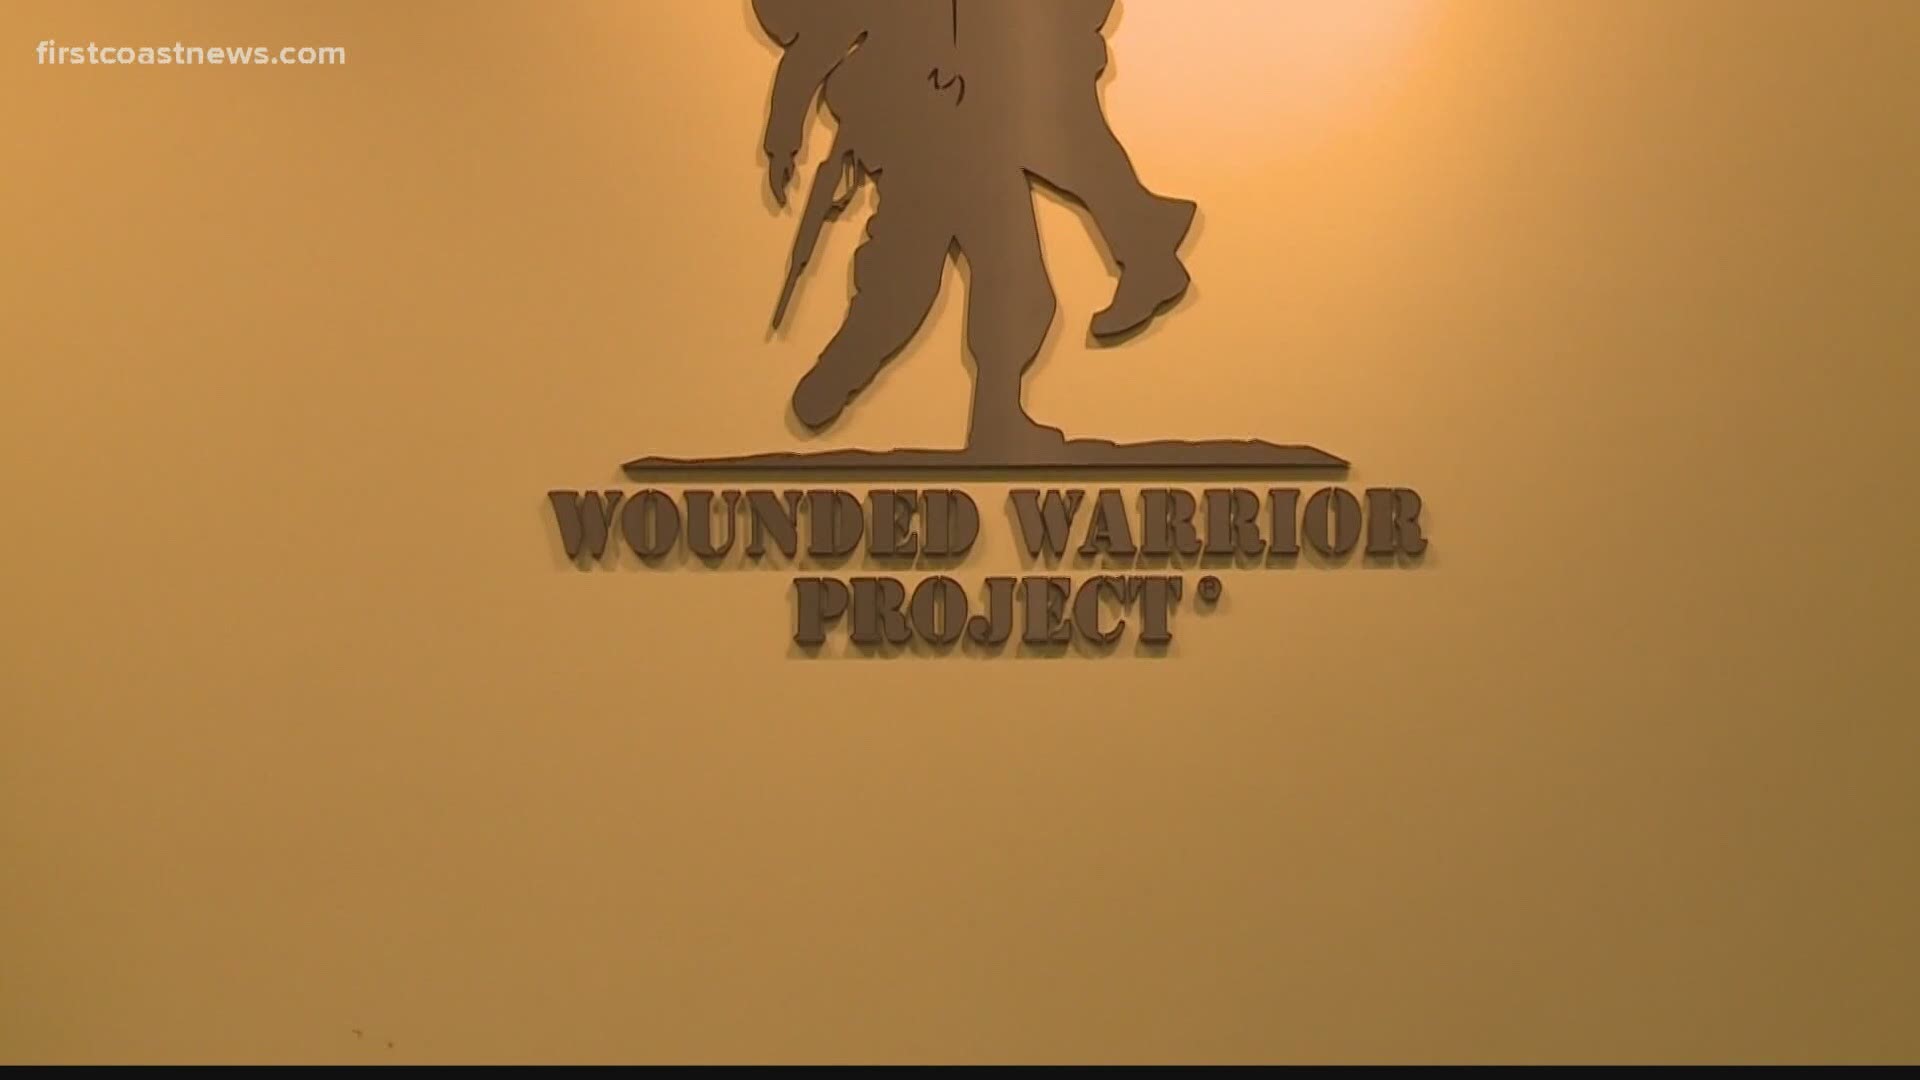 Wounded Warrior Project commits $10